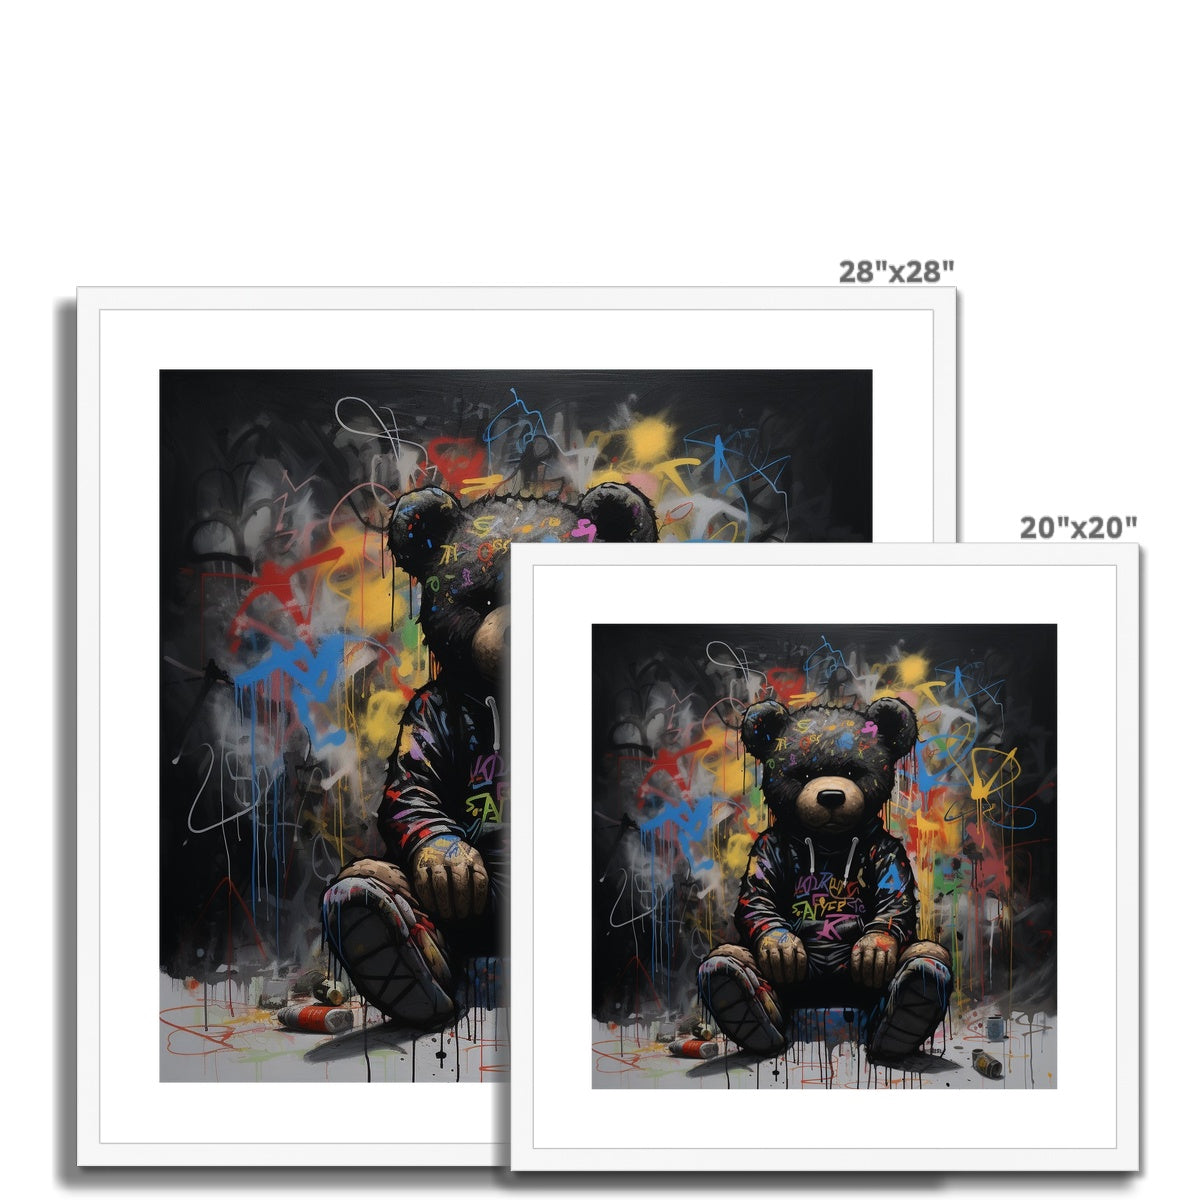 All Black Everything: Limited Edition Framed & Mounted Print